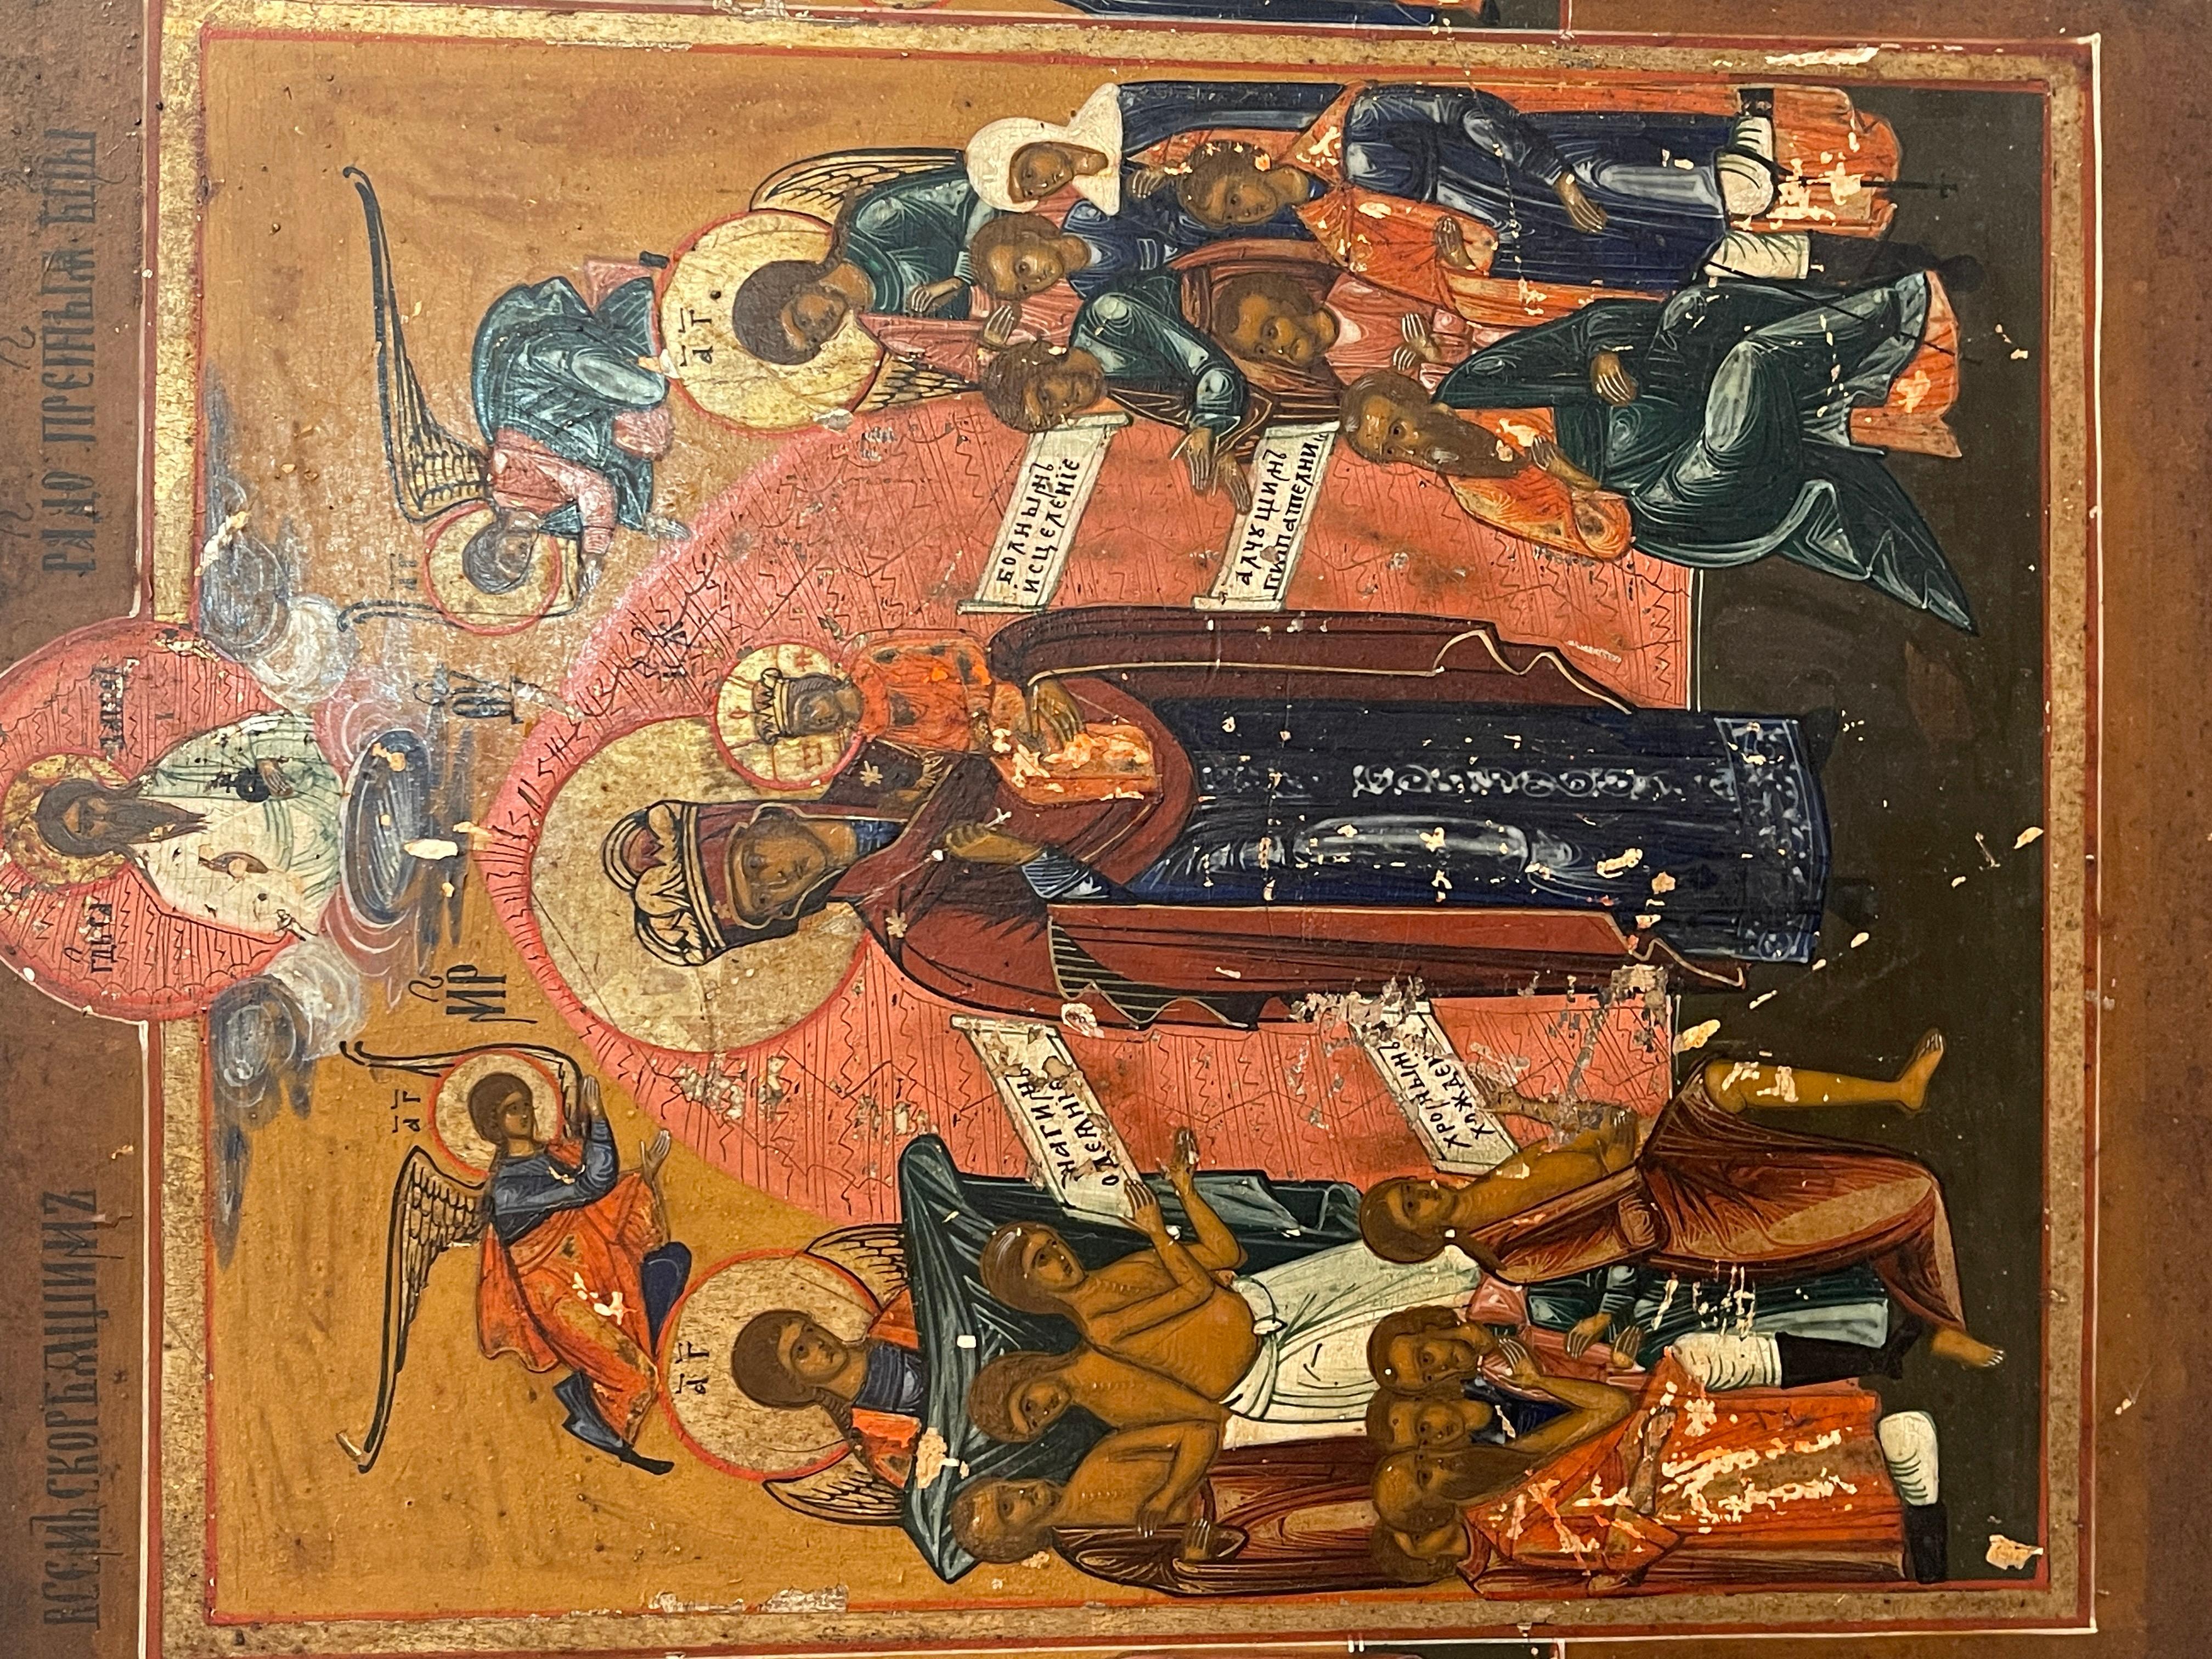 Ancient icon of fine workmanship, dating back to the 19th century, Russian. 
The icon represents the Madonna in the center with the Child, surrounded by Angels and Apostles.
In good condition, as shown in the photos, some defects and signs of wear